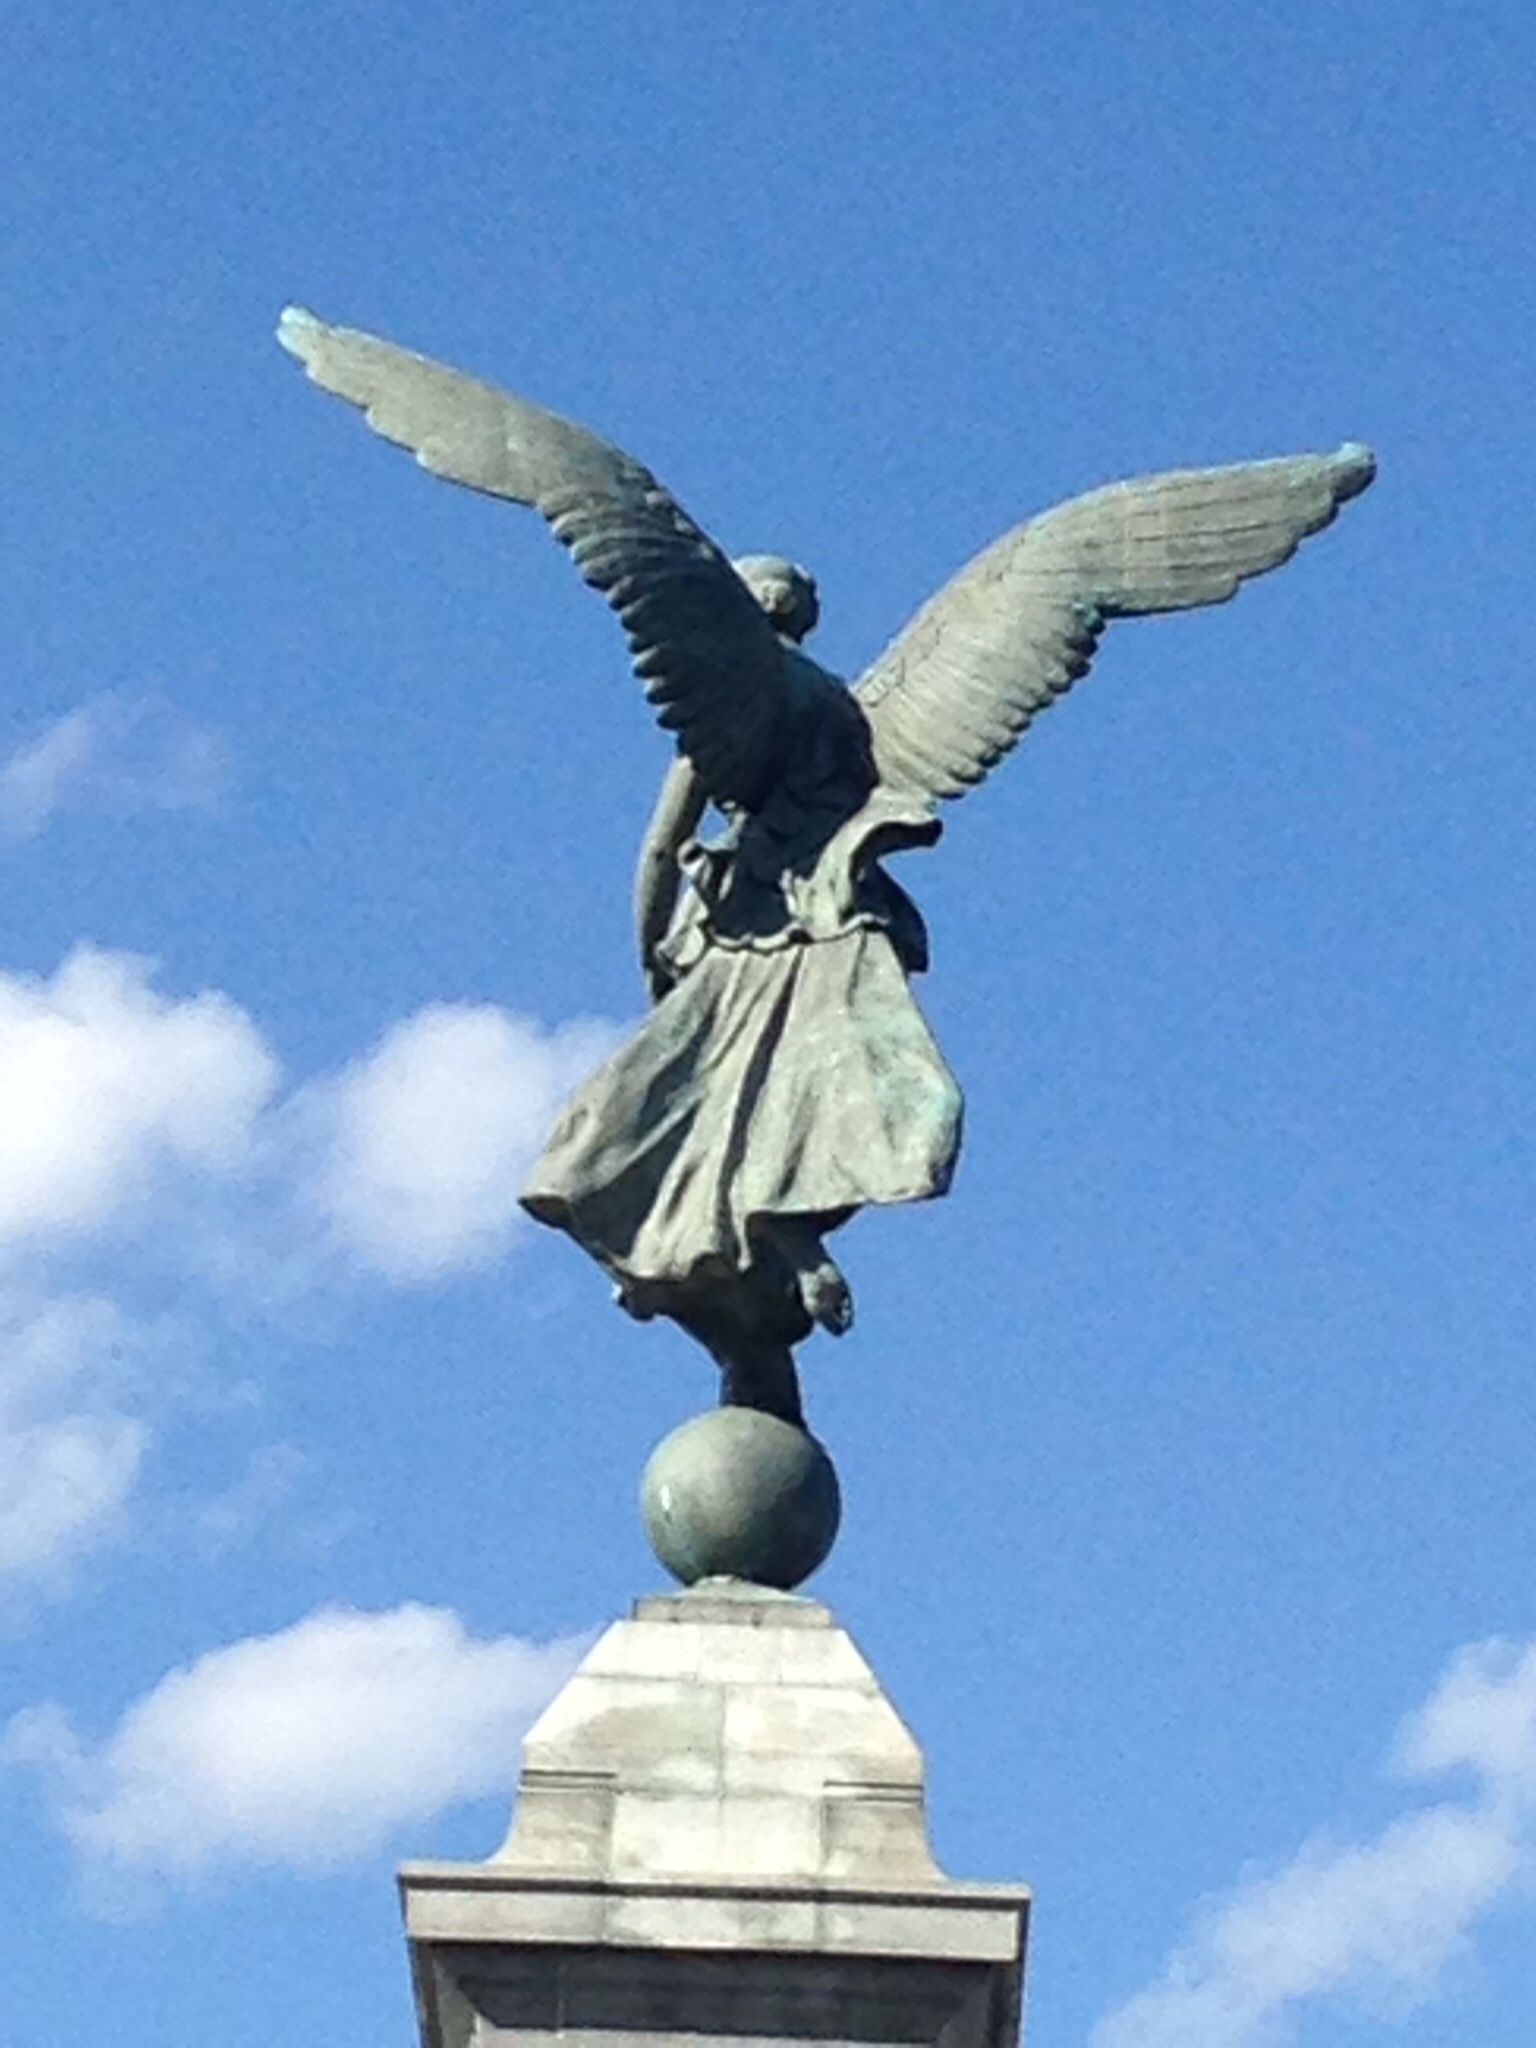 Back of the angel on the George-Étienne Cartier statue